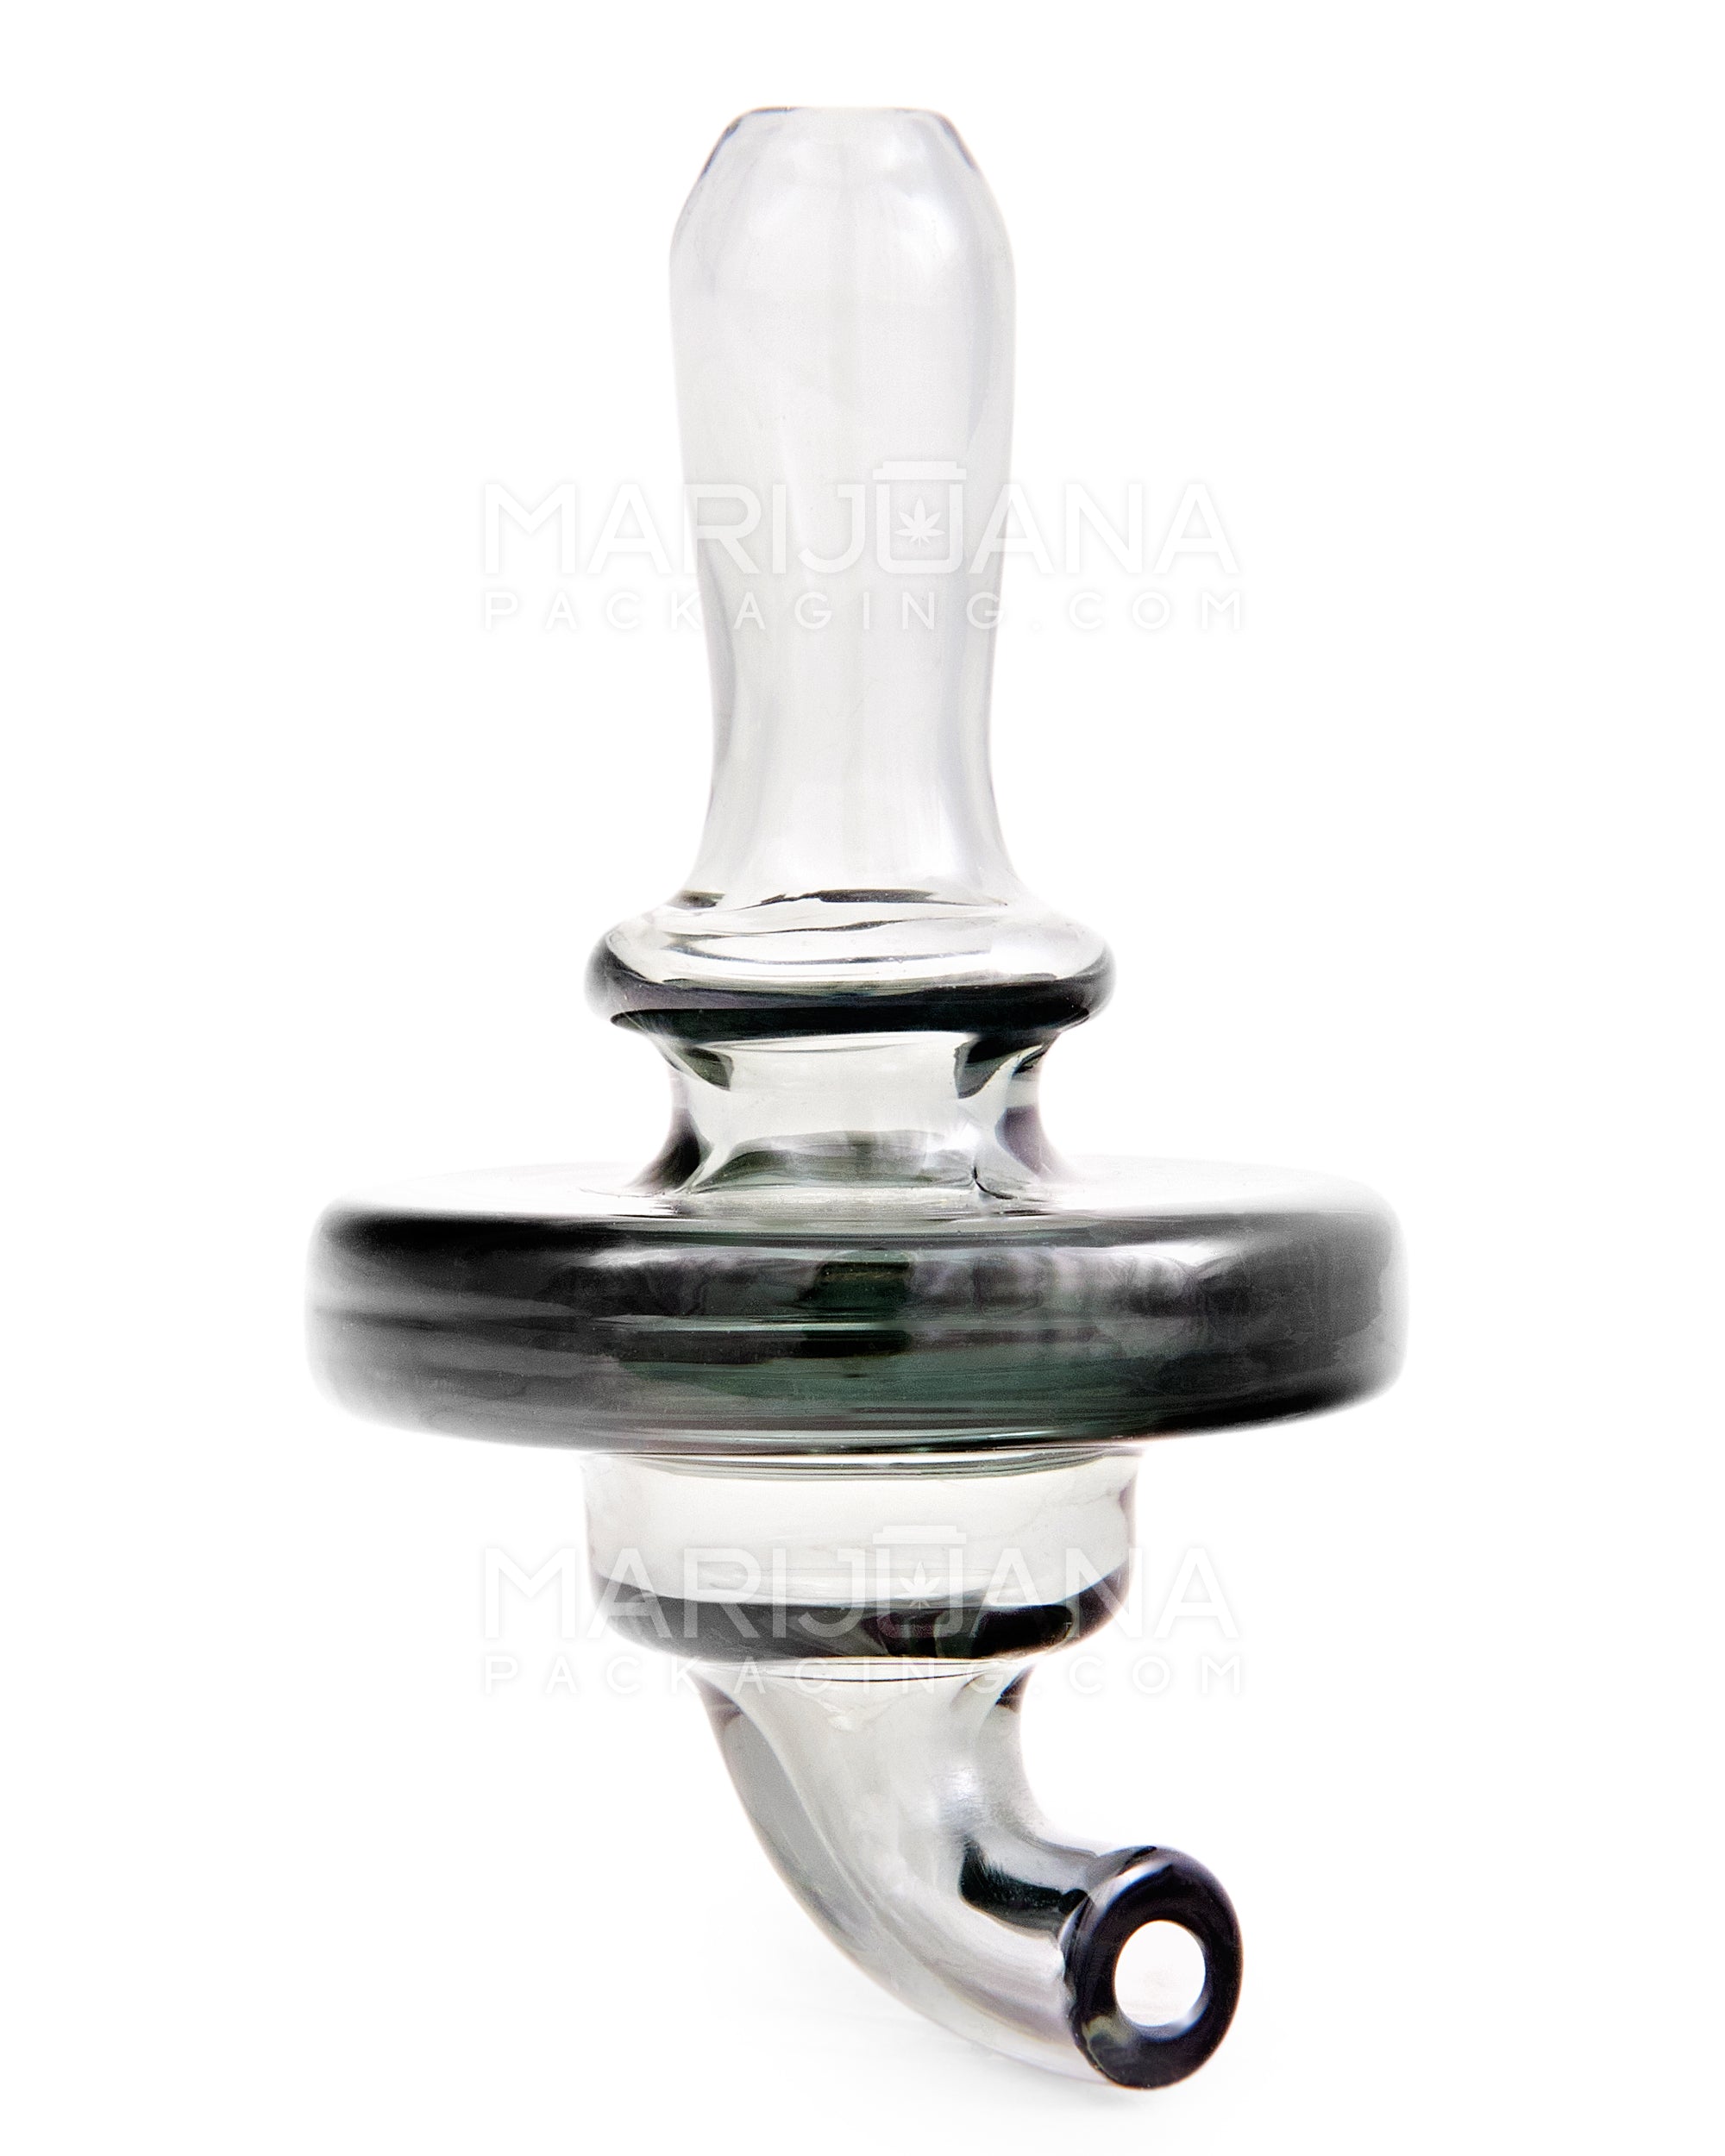 Flat top directional dab cap/tool. This is not available. This is